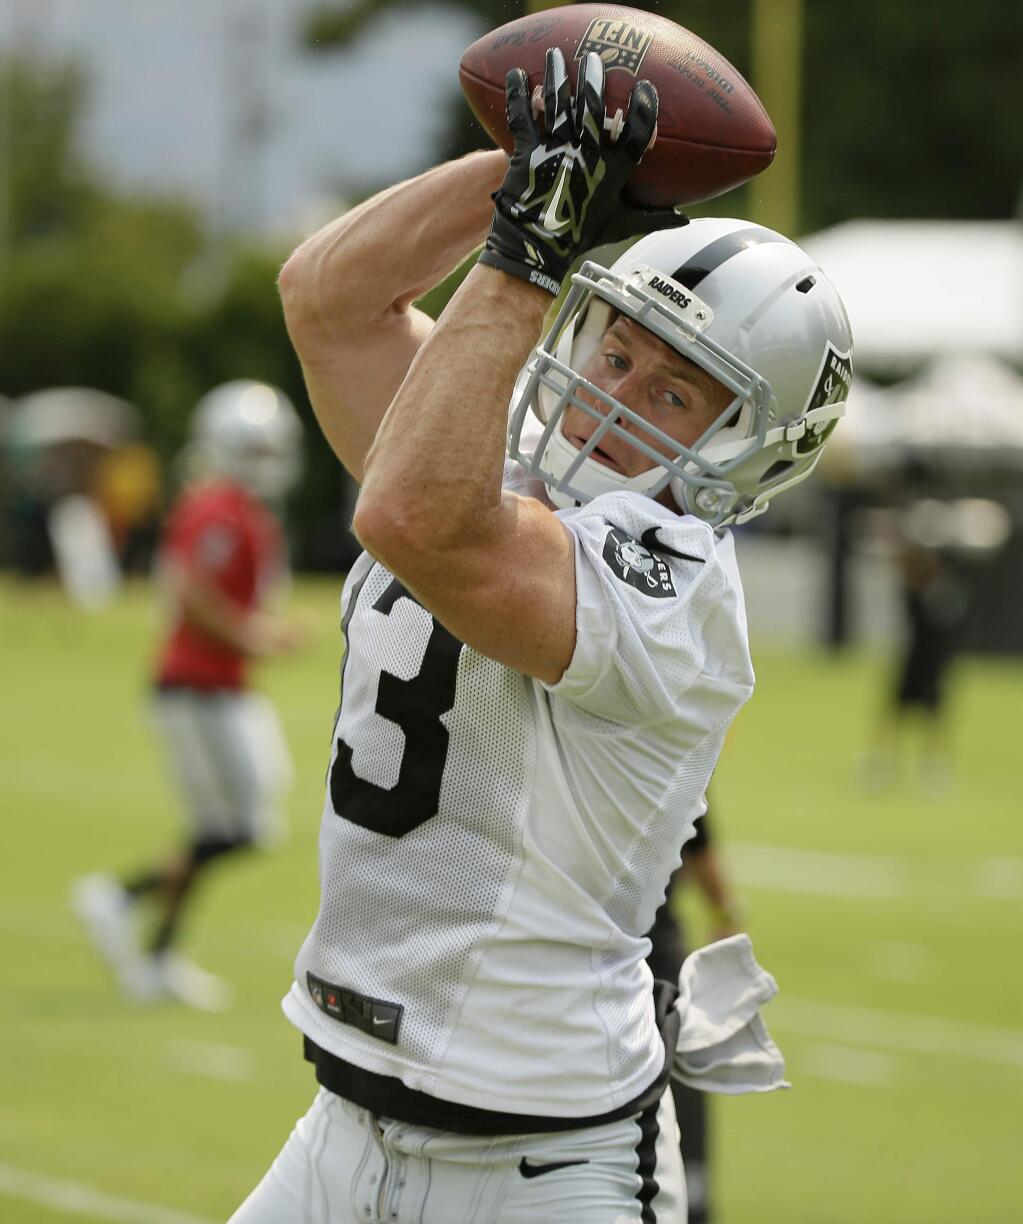 Oakland Raiders wide receiver Austin Willis catches a pass during their football training camp Friday, July 31, 2015, in Napa, Calif. (AP Photo/Eric Risberg)